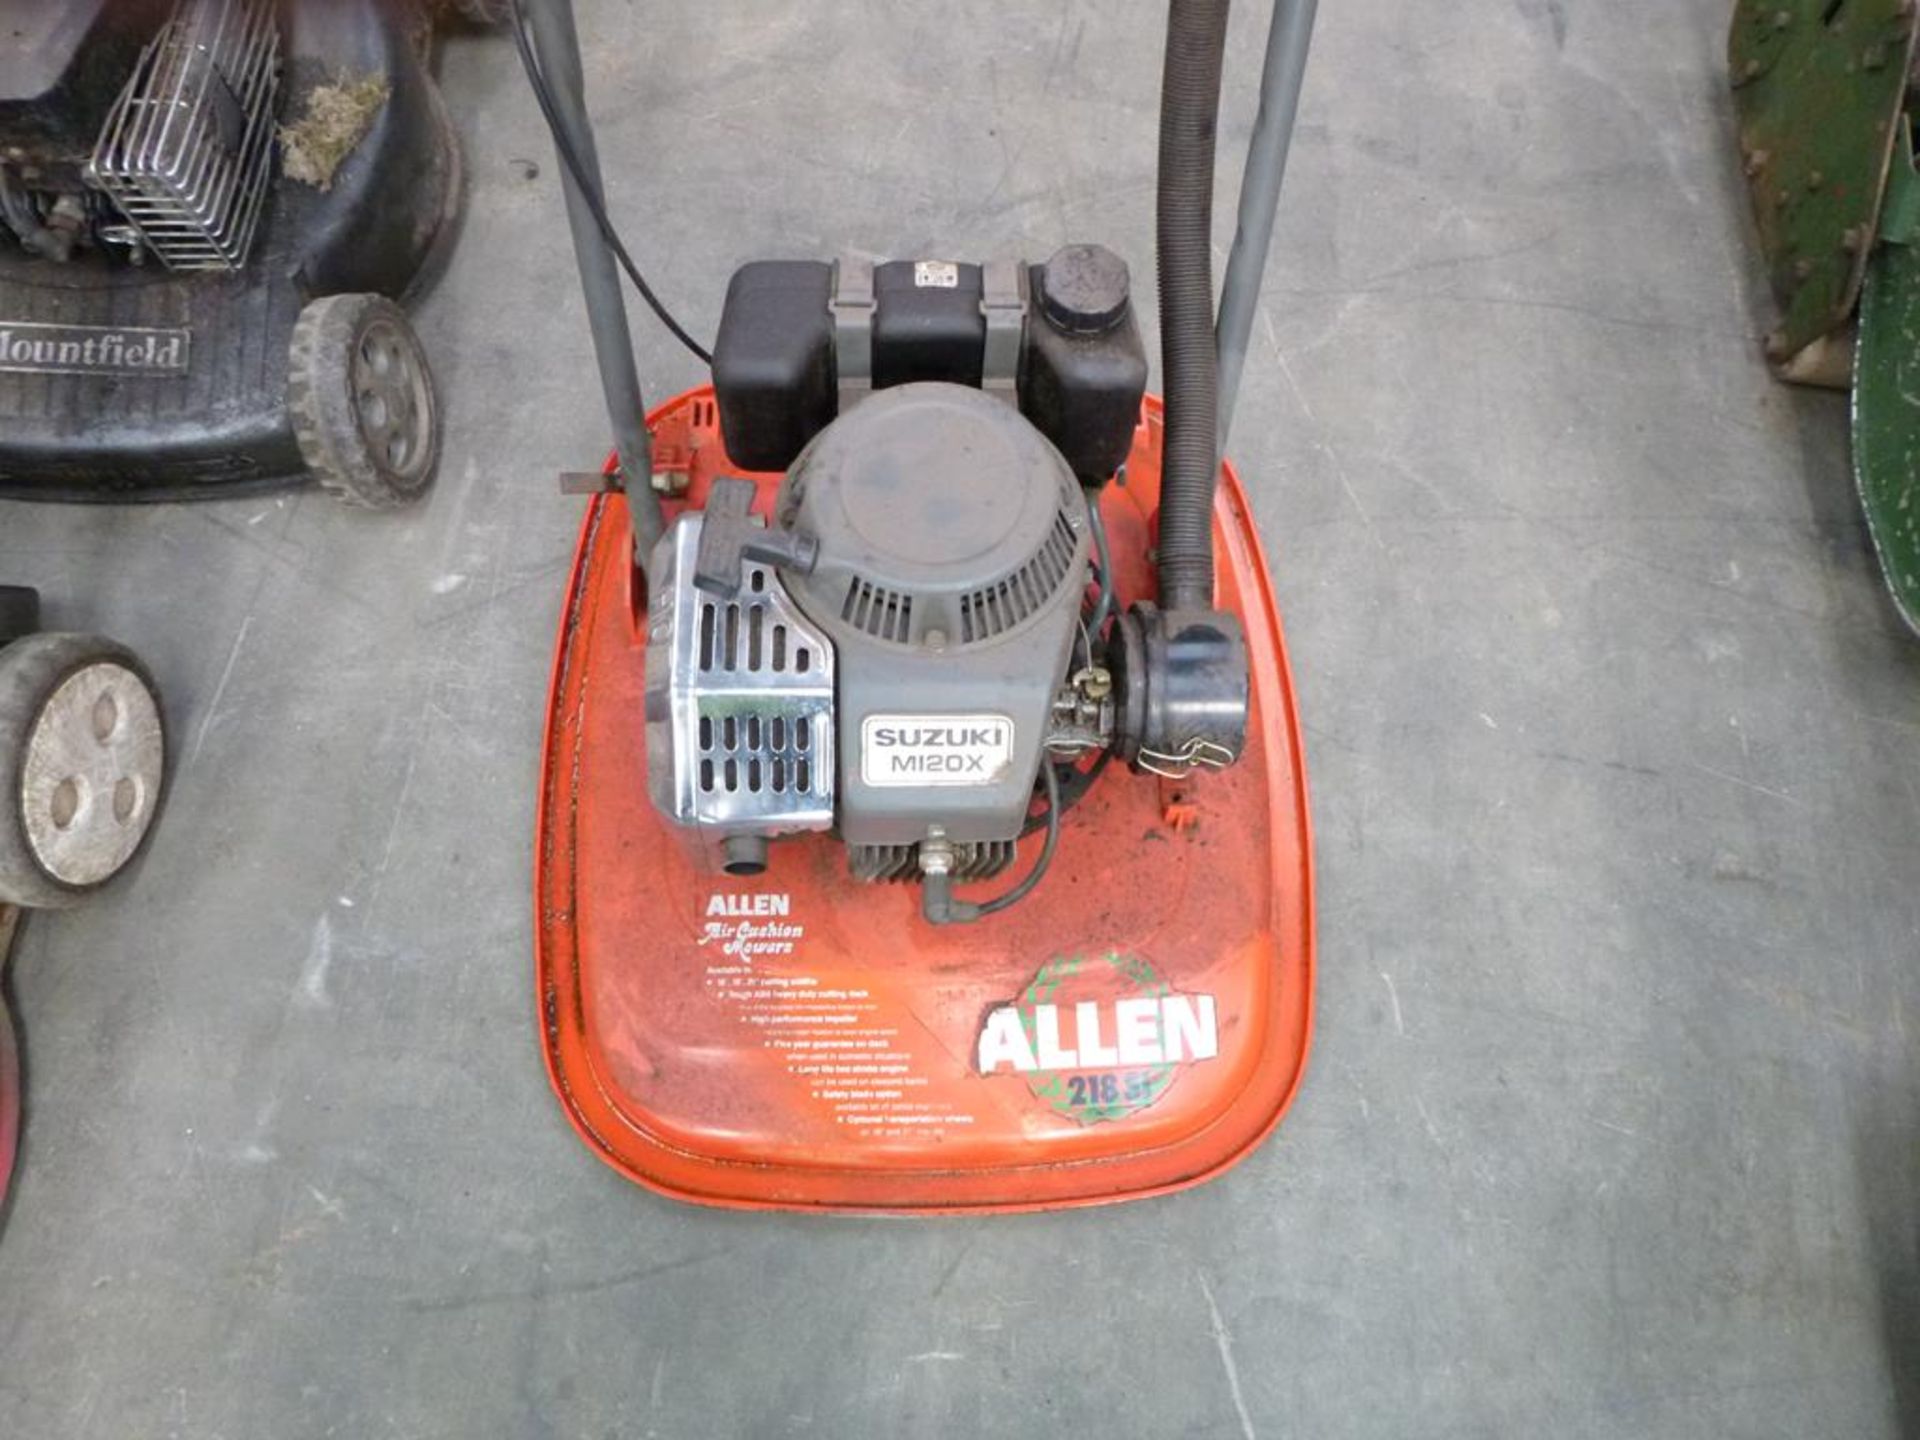 Trade In Allen 218 Si Petrol Powered Suzuki M120X Engine Air Cushion Hover Mower - Image 2 of 3